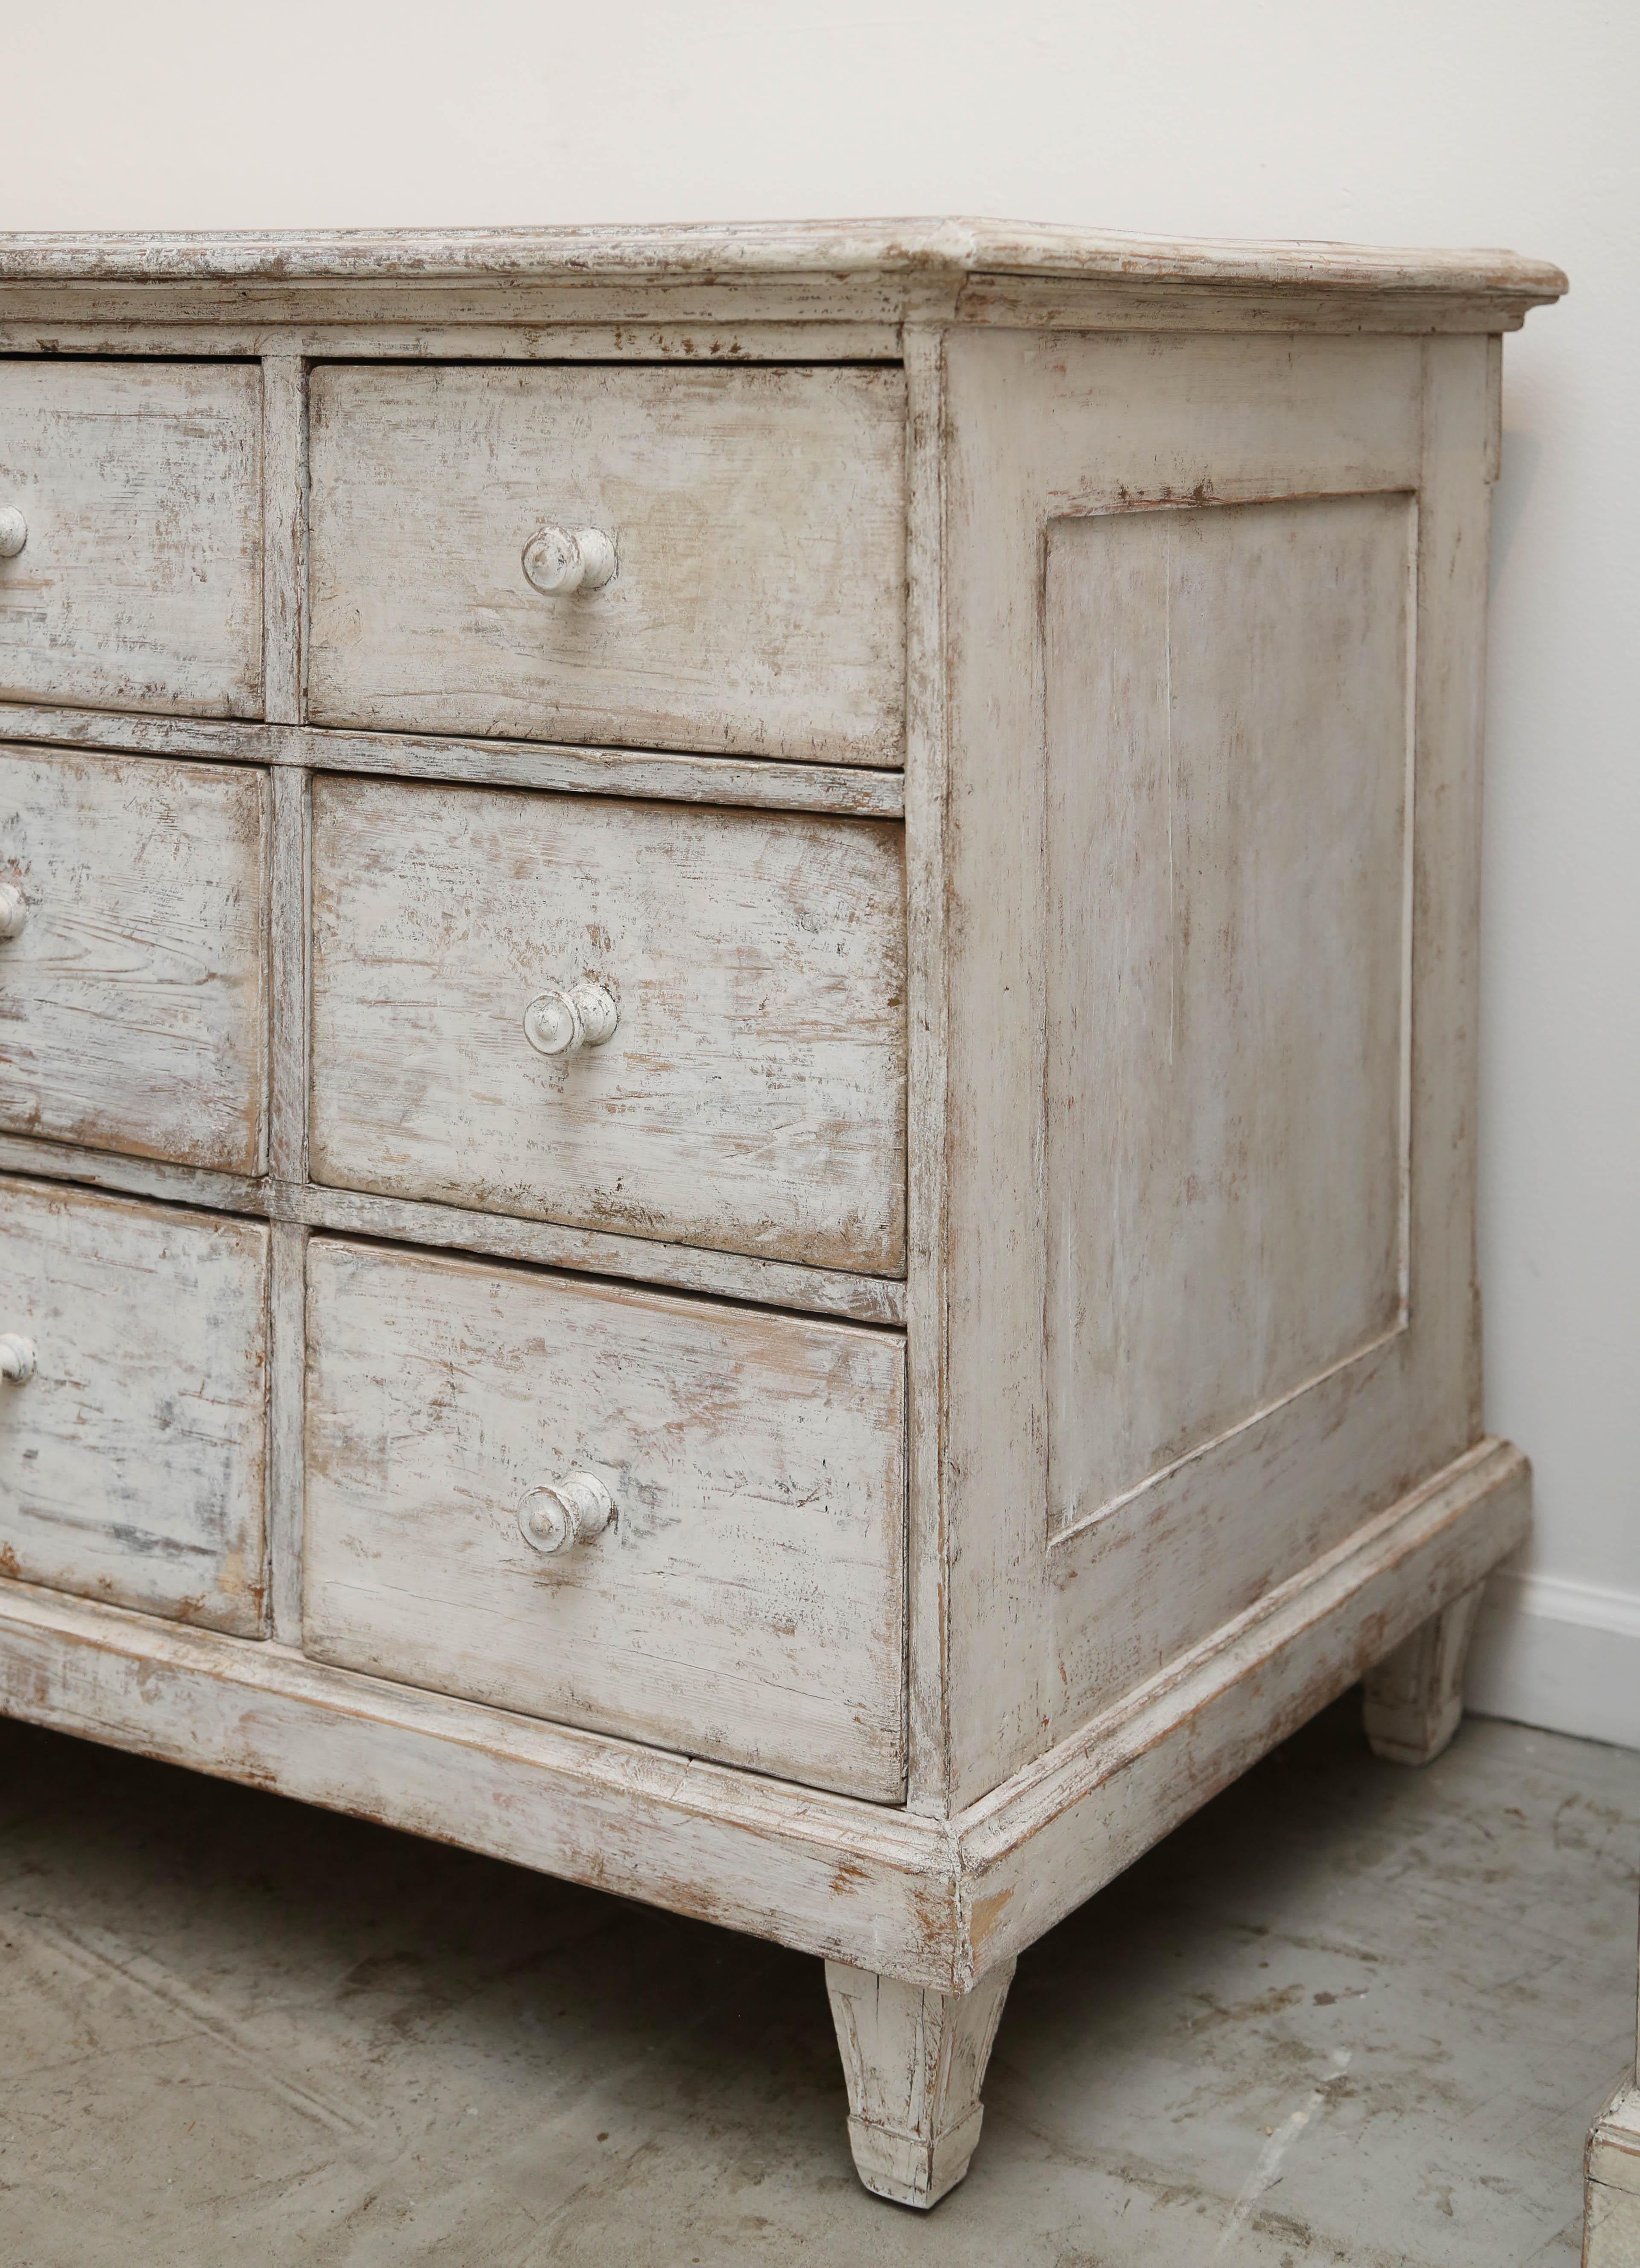 Antique Swedish Painted Apothecary Cabinet or Sideboard, Mid-19th Century In Good Condition For Sale In West Palm Beach, FL